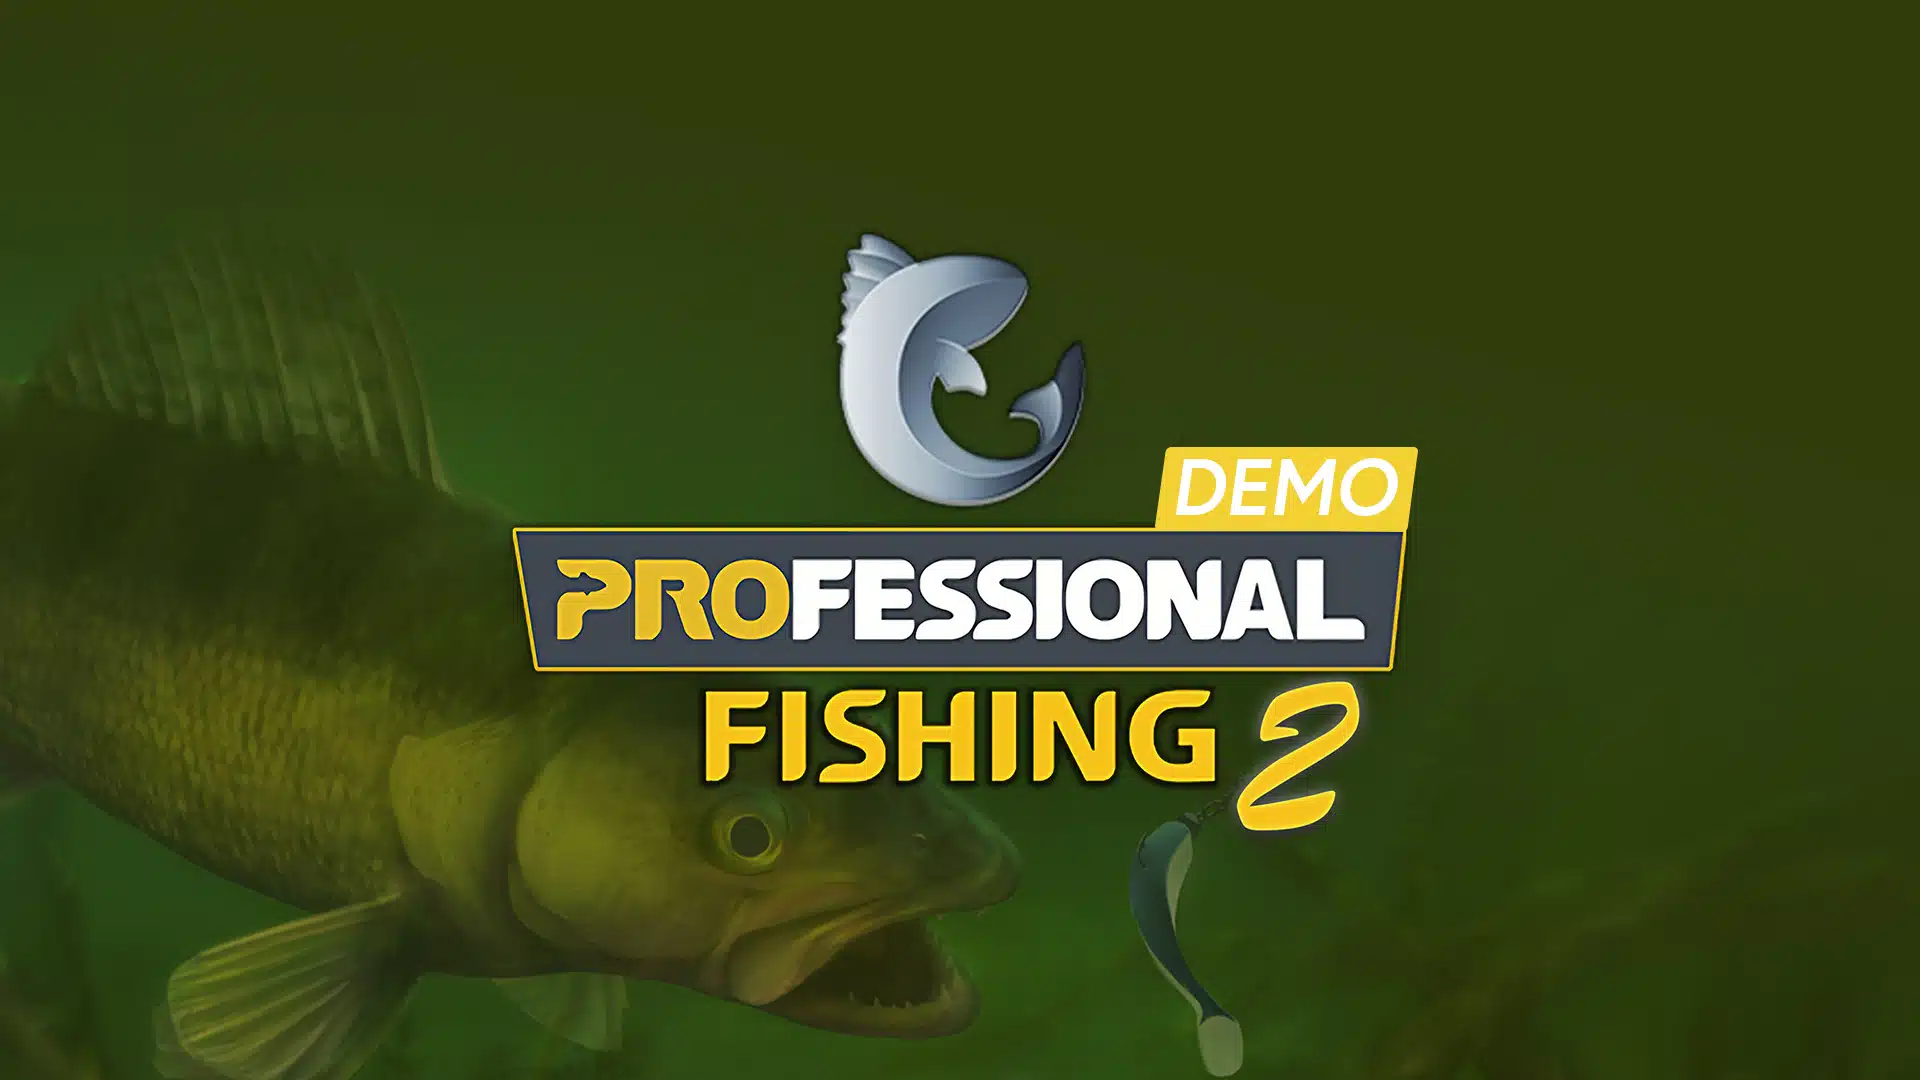 Press Release] Professional Fishing 2 demo now available on PC